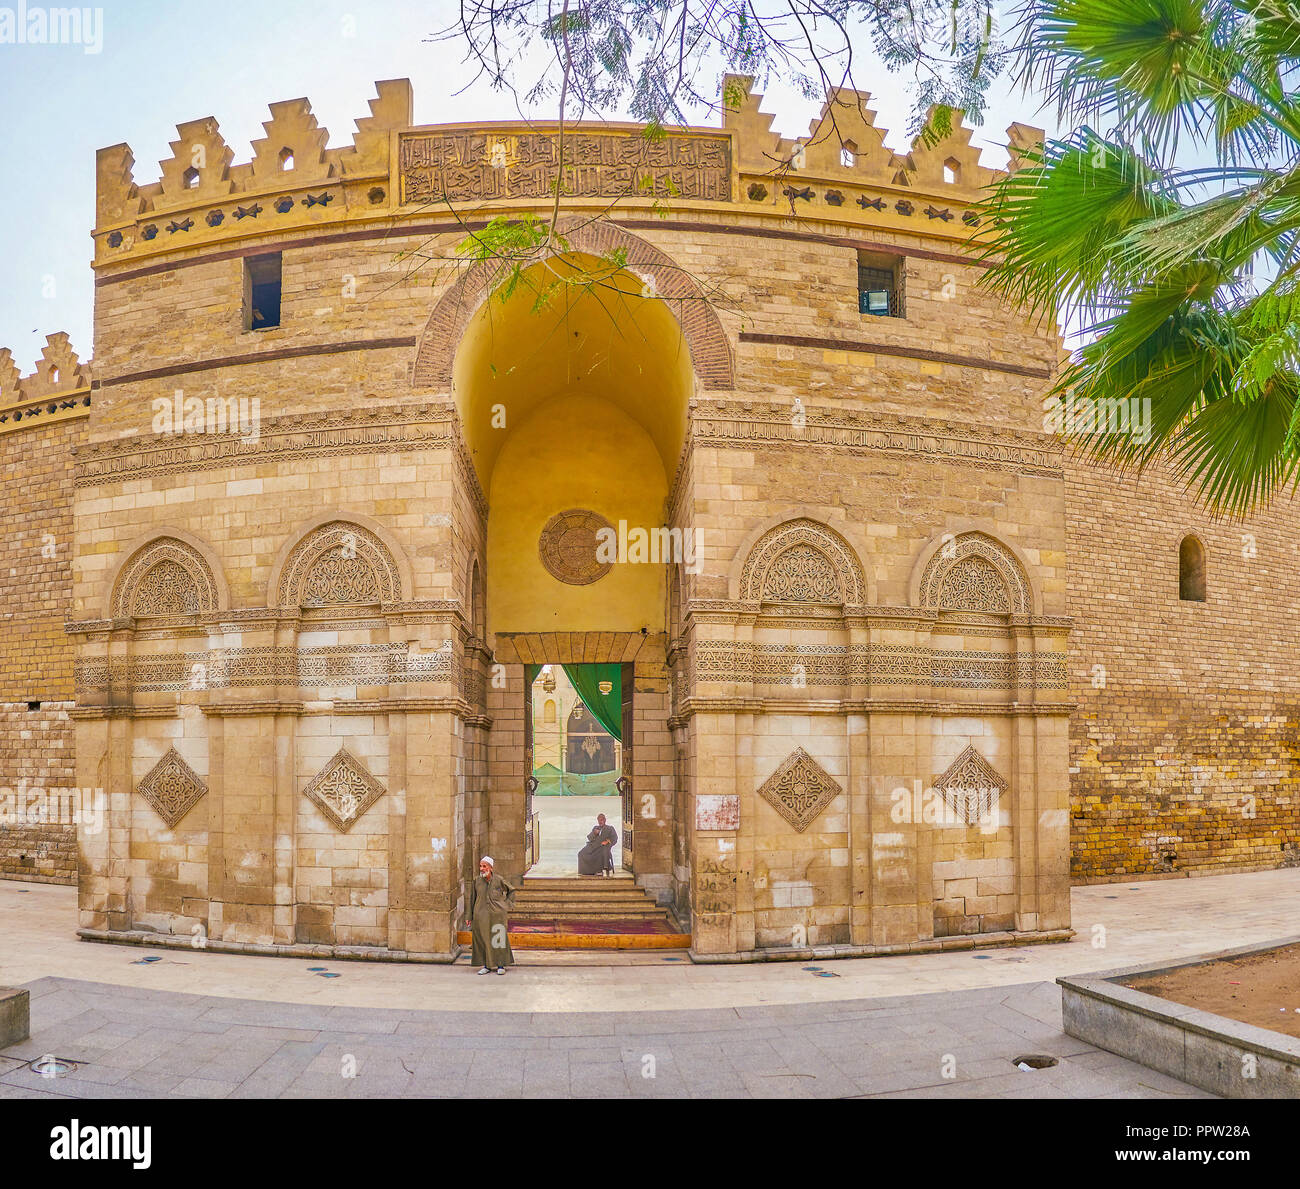 CAIRO, EGYPT - DECEMBER 23, 2017: The huge gatehouse of Al-Hakim Mosque opens the way to the large courtyard, on December 23 in Cairo Stock Photo